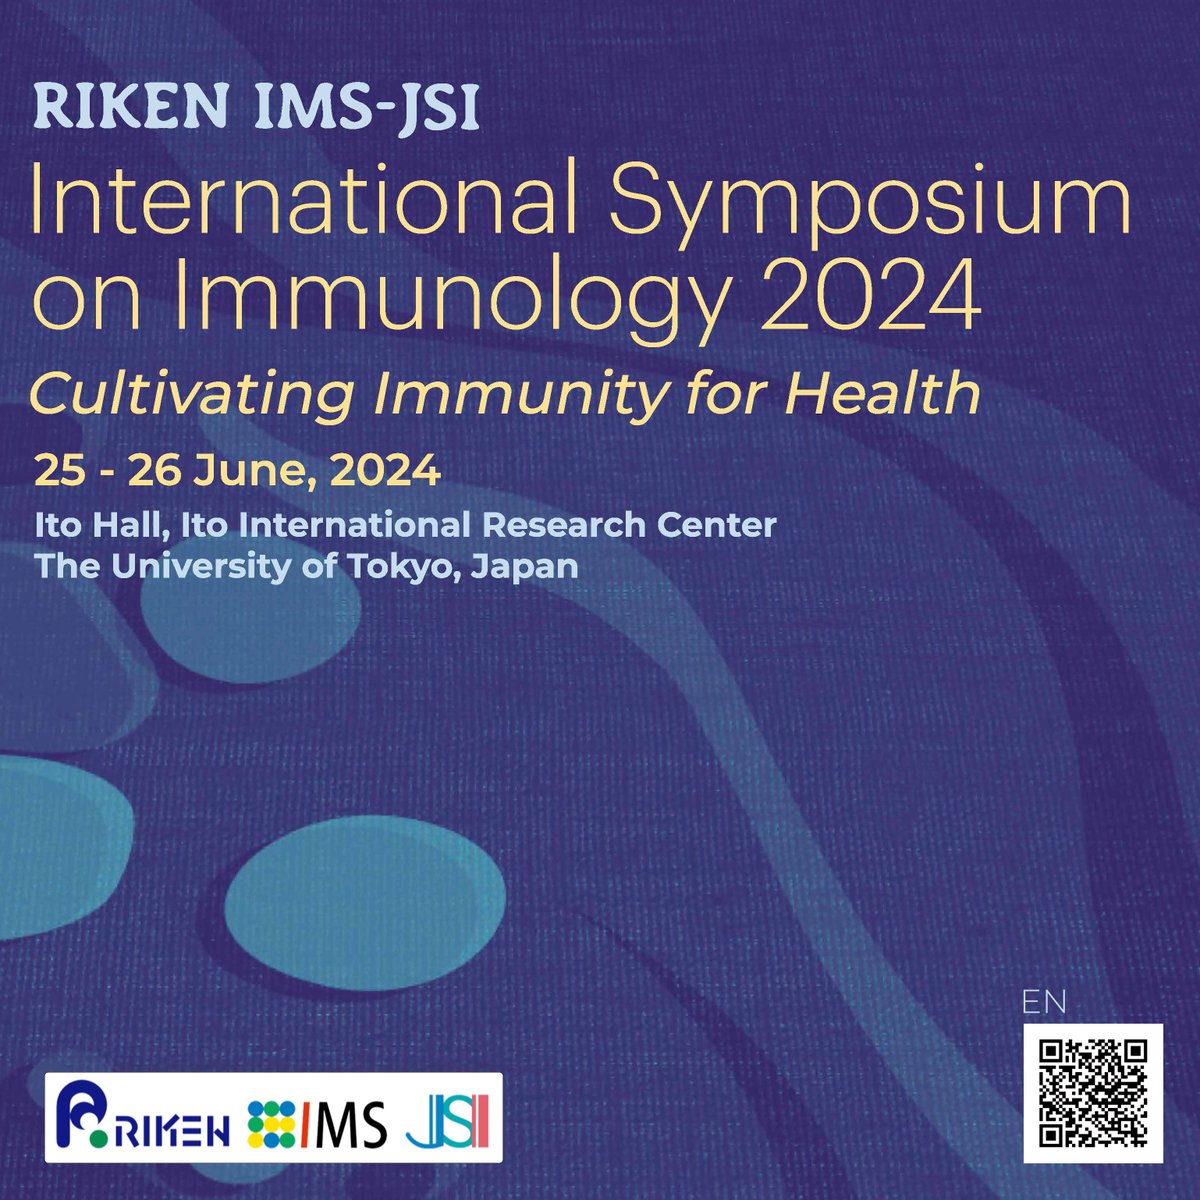 Registration in progress! We look forward to your participation. RIKEN IMS-JSI International Symposium on Immunology 2024 Cultivating Immunity for Health June 25-26, 2024. Ito Hall, The University of Tokyo Tentative timetable, registration (by 6/3)↓↓↓ ims.riken.jp/events/rcaisym…